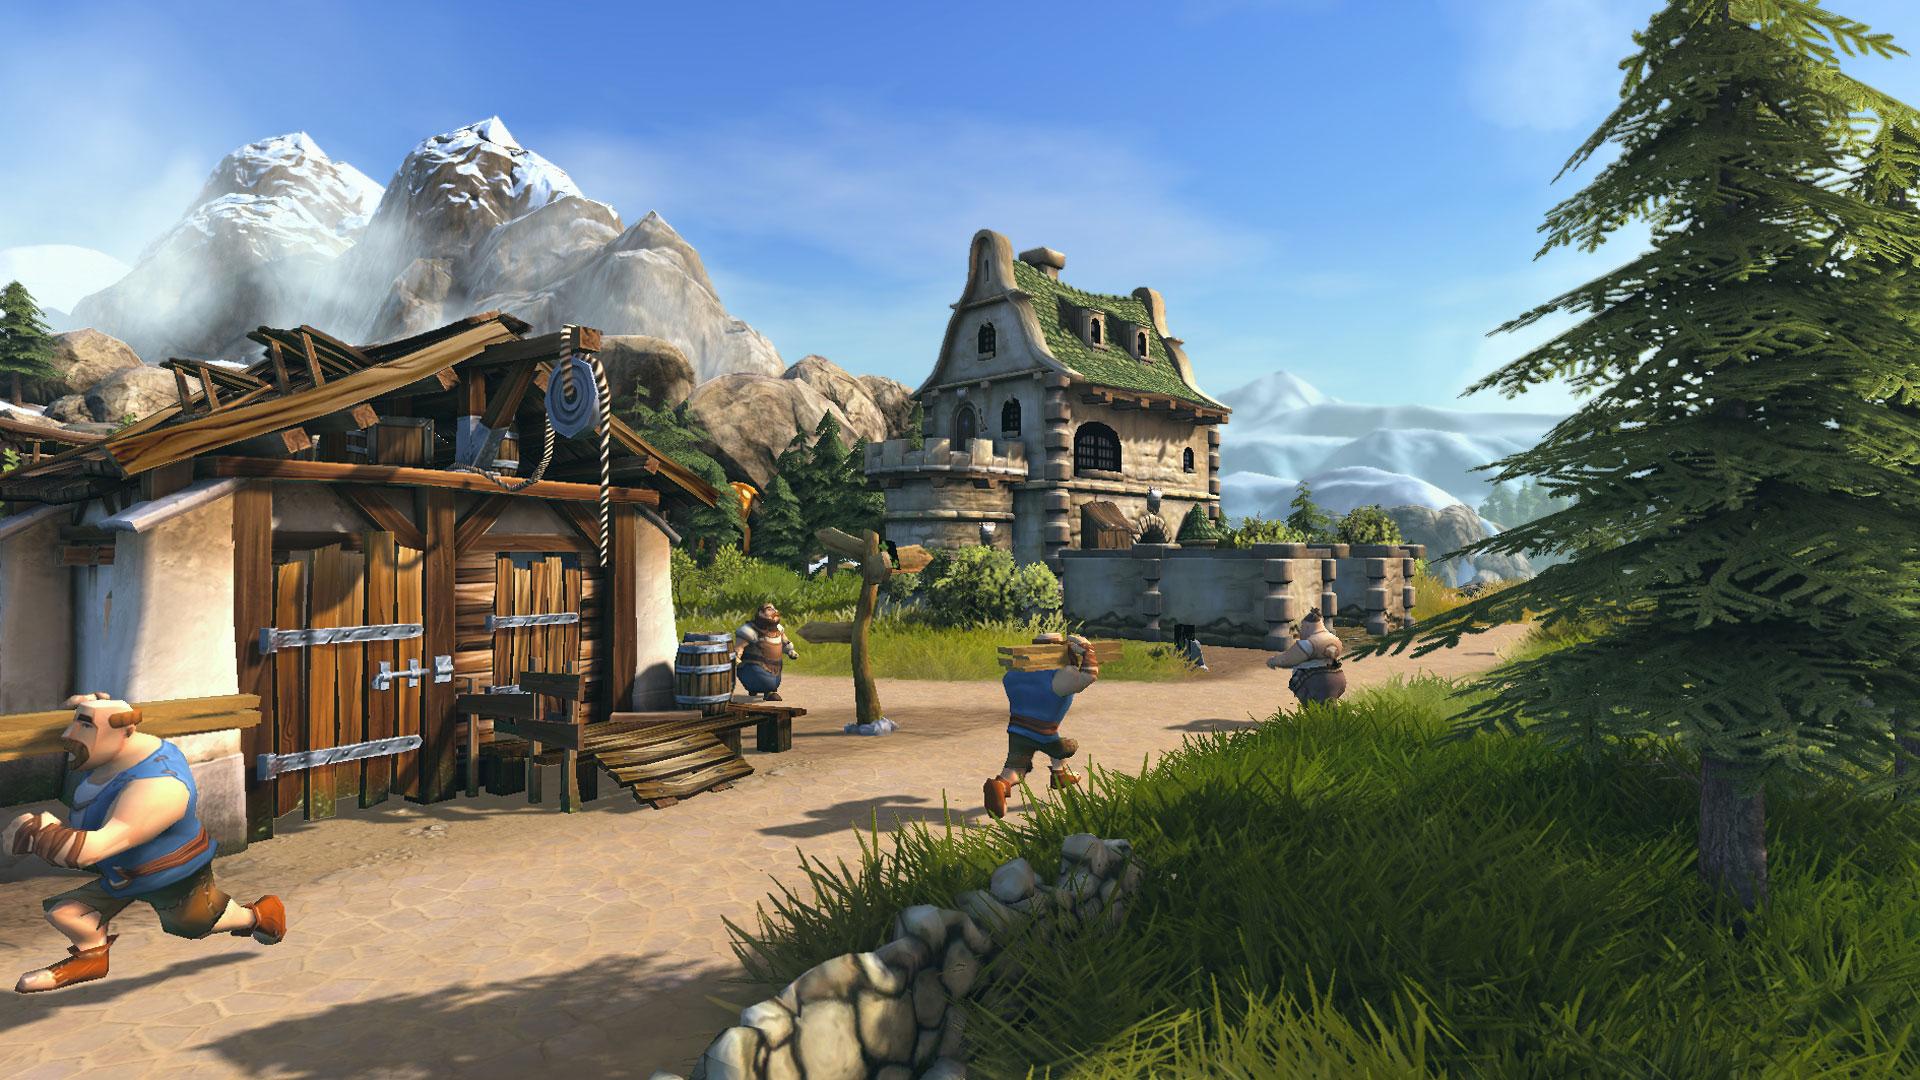 download the settlers paths to a kingdom for free